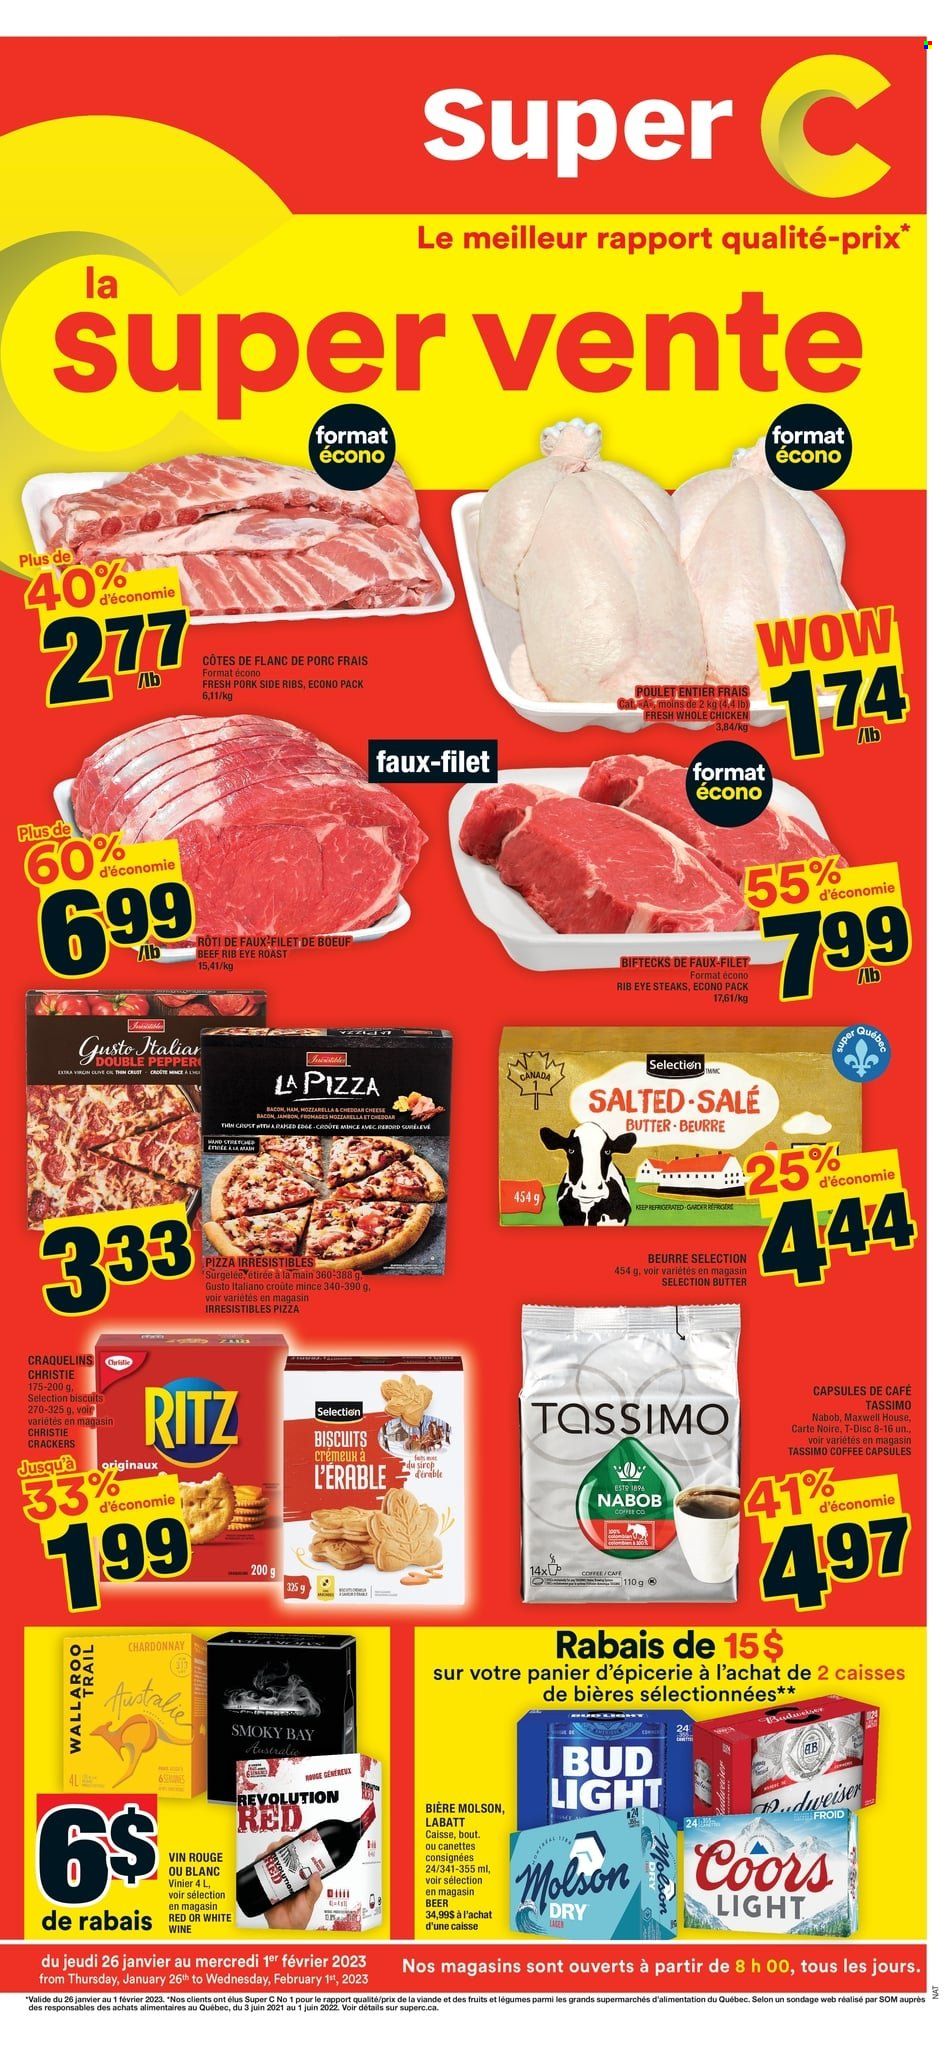 thumbnail - Super C Flyer - January 26, 2023 - February 01, 2023 - Sales products - pizza, bacon, ham, cheddar, butter, crackers, biscuit, RITZ, pepper, extra virgin olive oil, Maxwell House, coffee, coffee capsules, Chardonnay, wine, beer, Bud Light, whole chicken, chicken, beef meat, ribs, Budweiser, steak, Coors. Page 1.